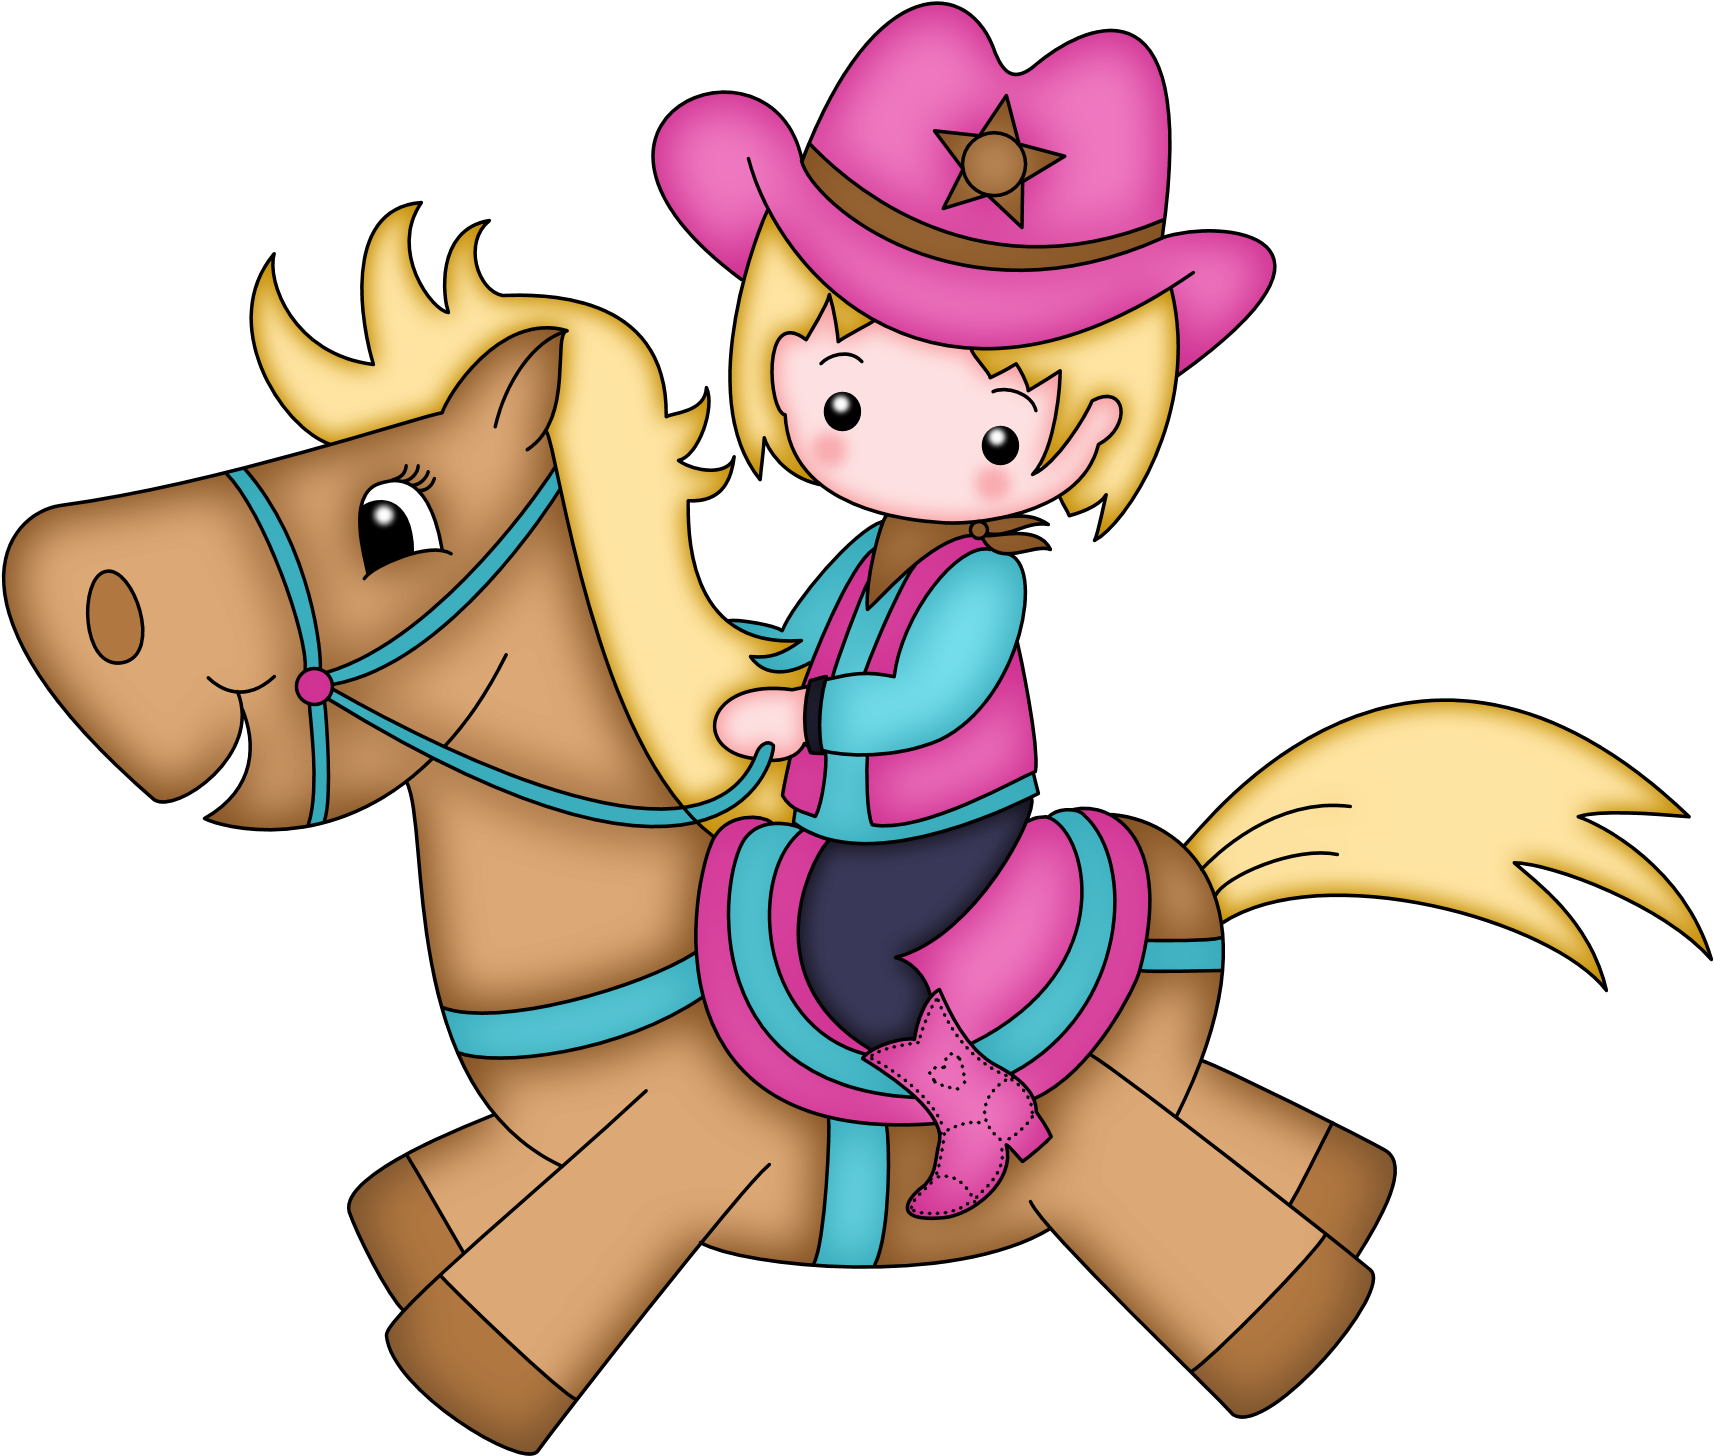 Find This Pin And More On Cowboy E Cowgirl By Braz2766 - Fille À Cheval Clipart (1800x1547)